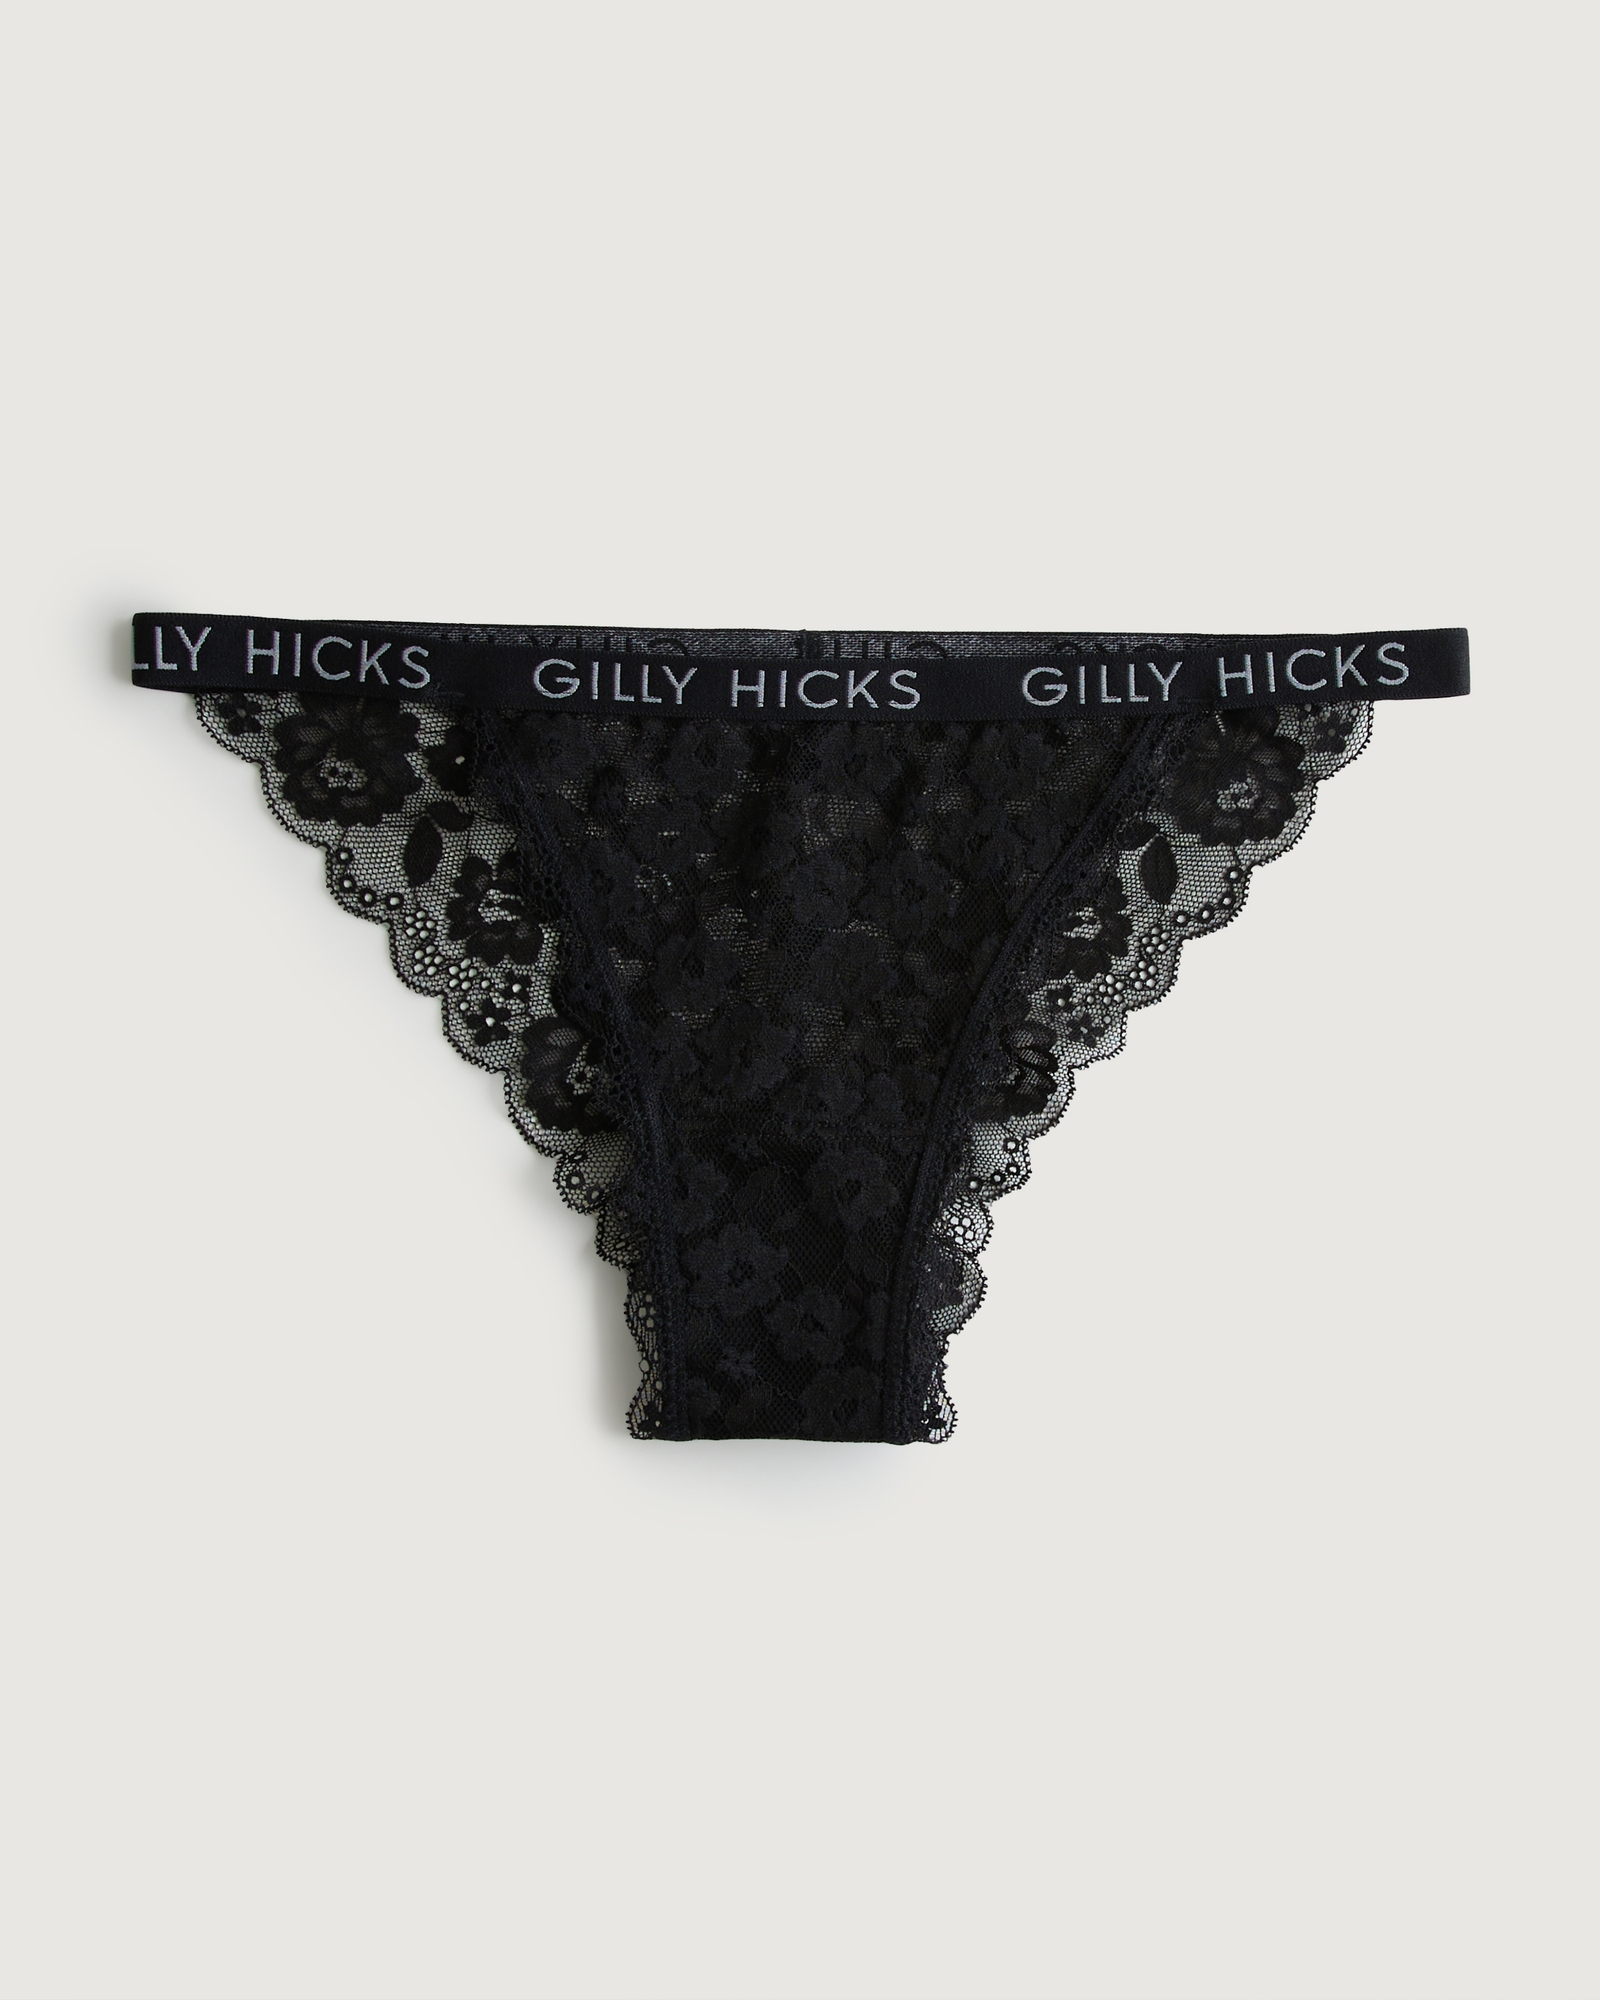 Gilly Hicks, Other, Black Lace Gilly Hicks Underwear